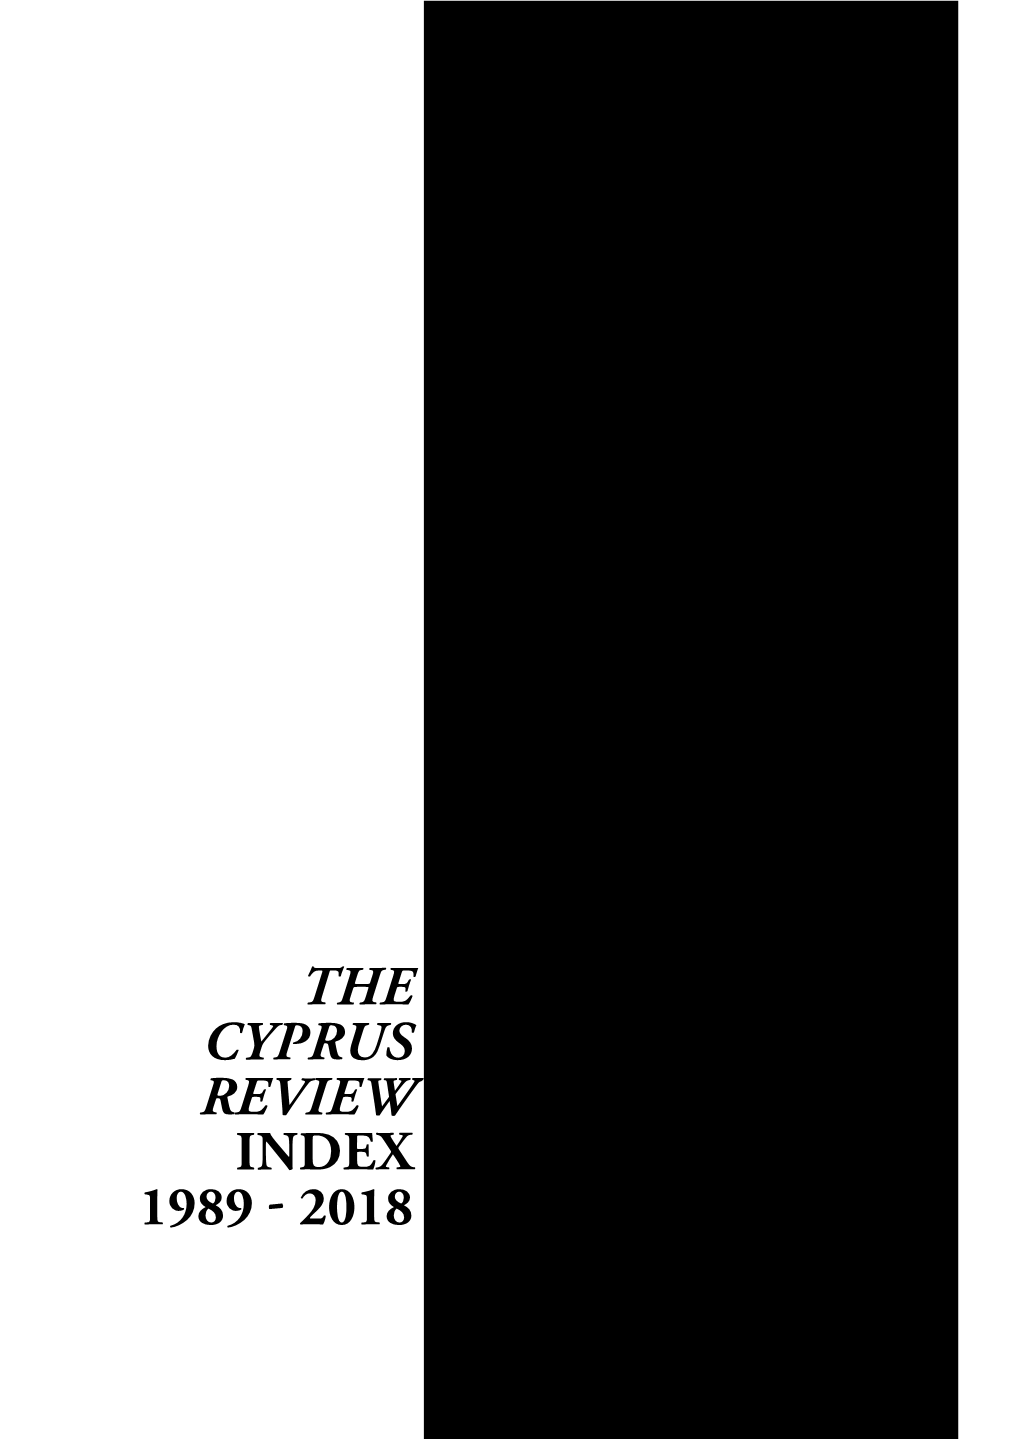 The Cyprus Review Index 1989 - 2018